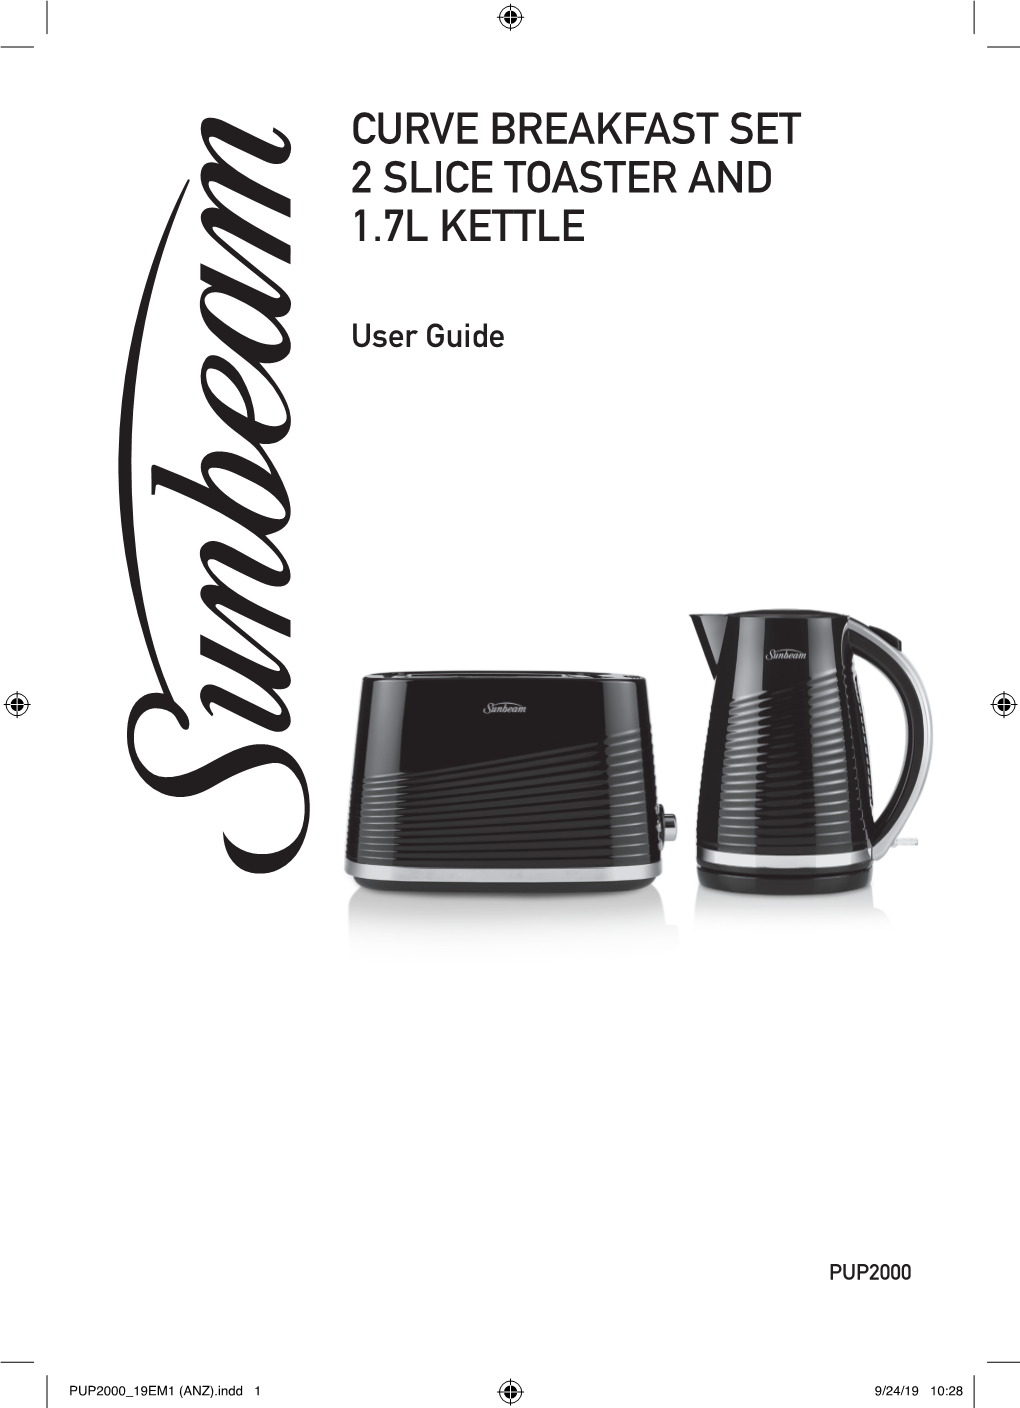 Curve Breakfast Set 2 Slice Toaster and 1.7L Kettle